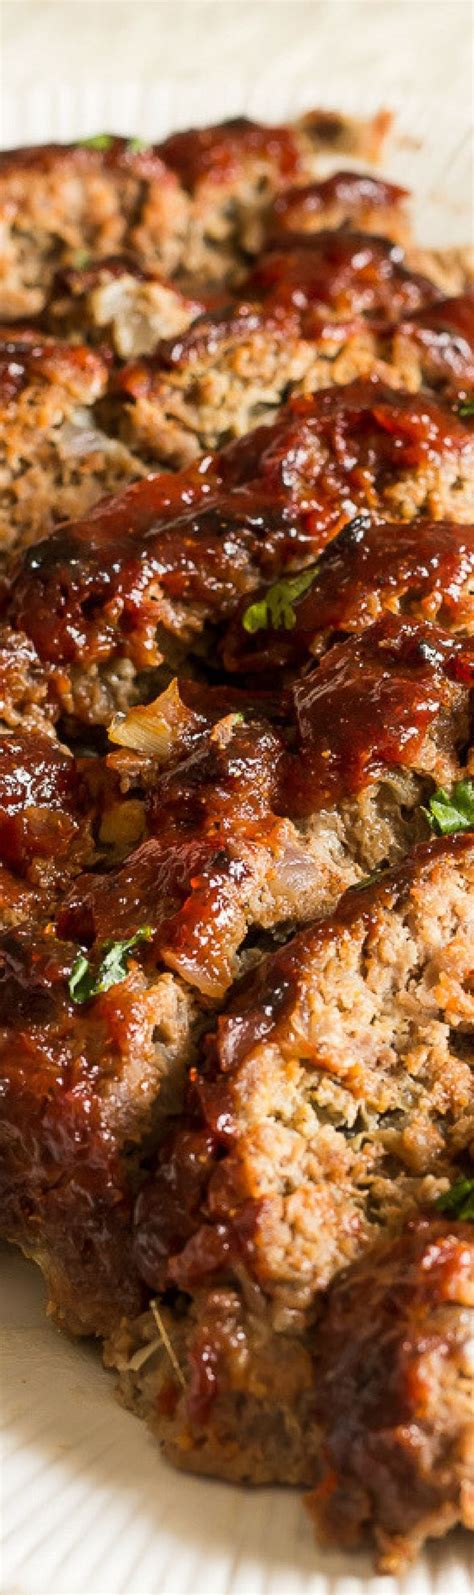 This traditional meatloaf recipe is just like mom used to make, made with ground beef and a sweet and tangy glaze topping. Best 2 Lb Meatloaf Recipes / Mom's Favorite Meatloaf ...